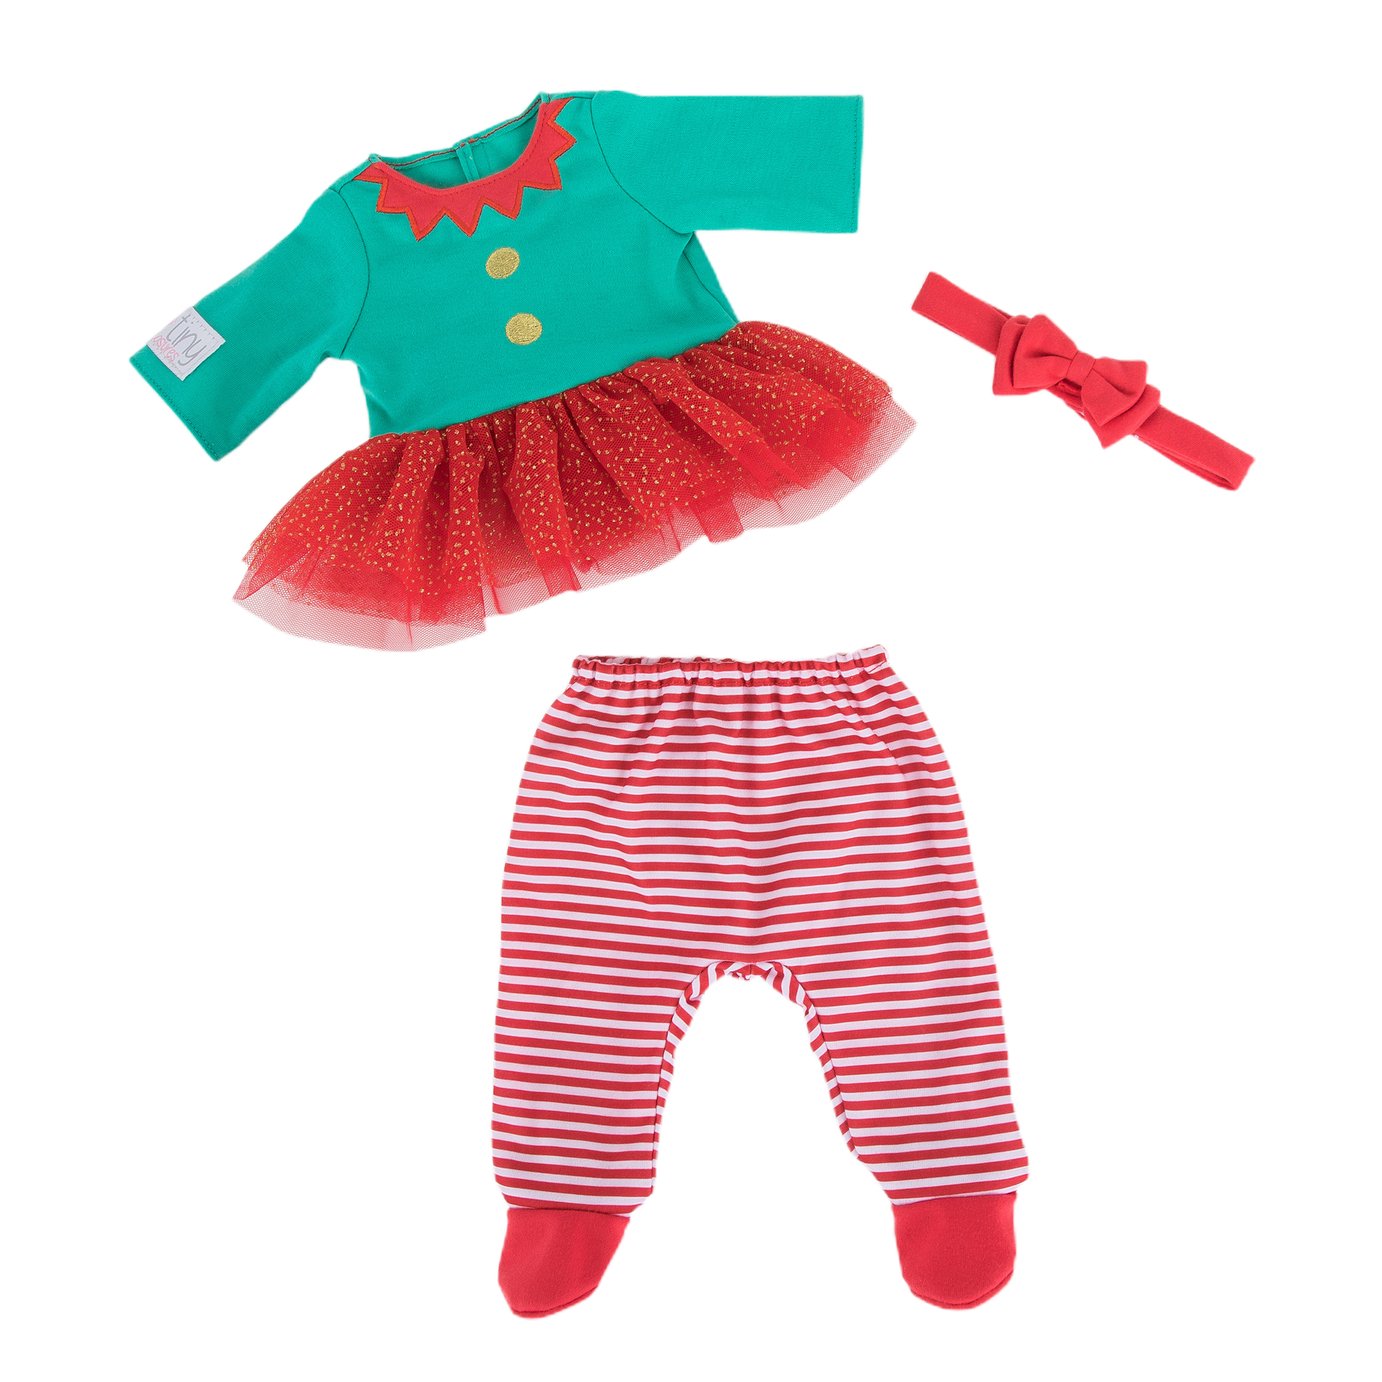 Chad Valley Tiny Treasures Tutu Outfit